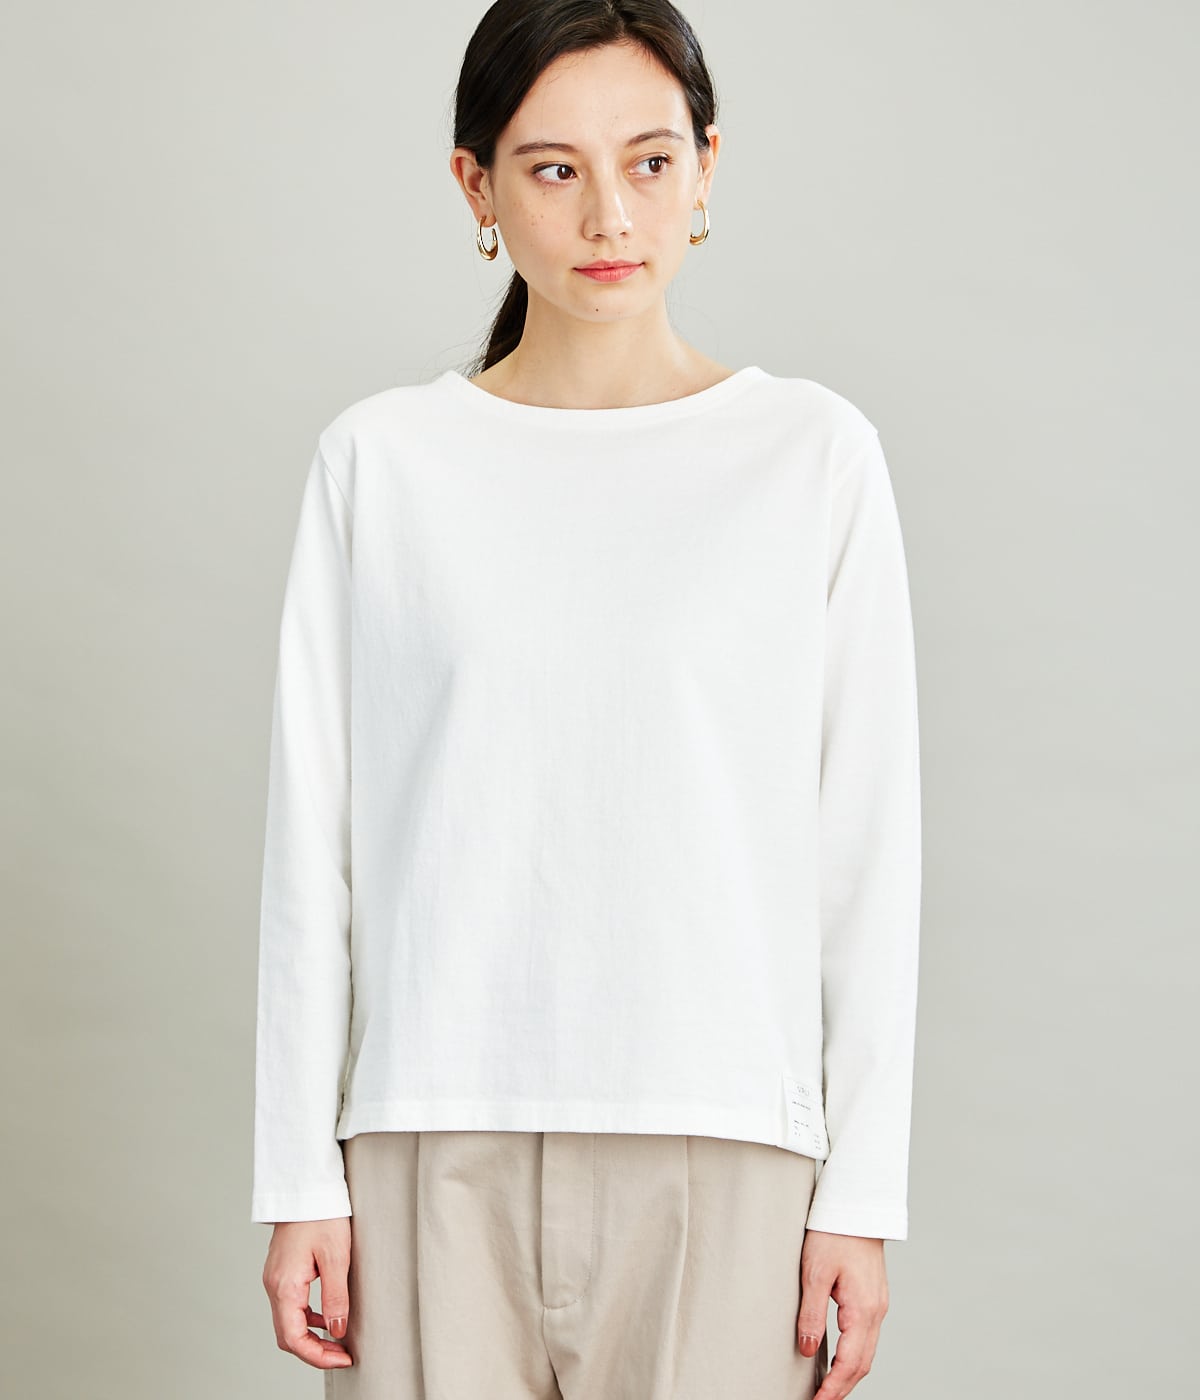 Dry Cotton Jersey ボートネックカットソー